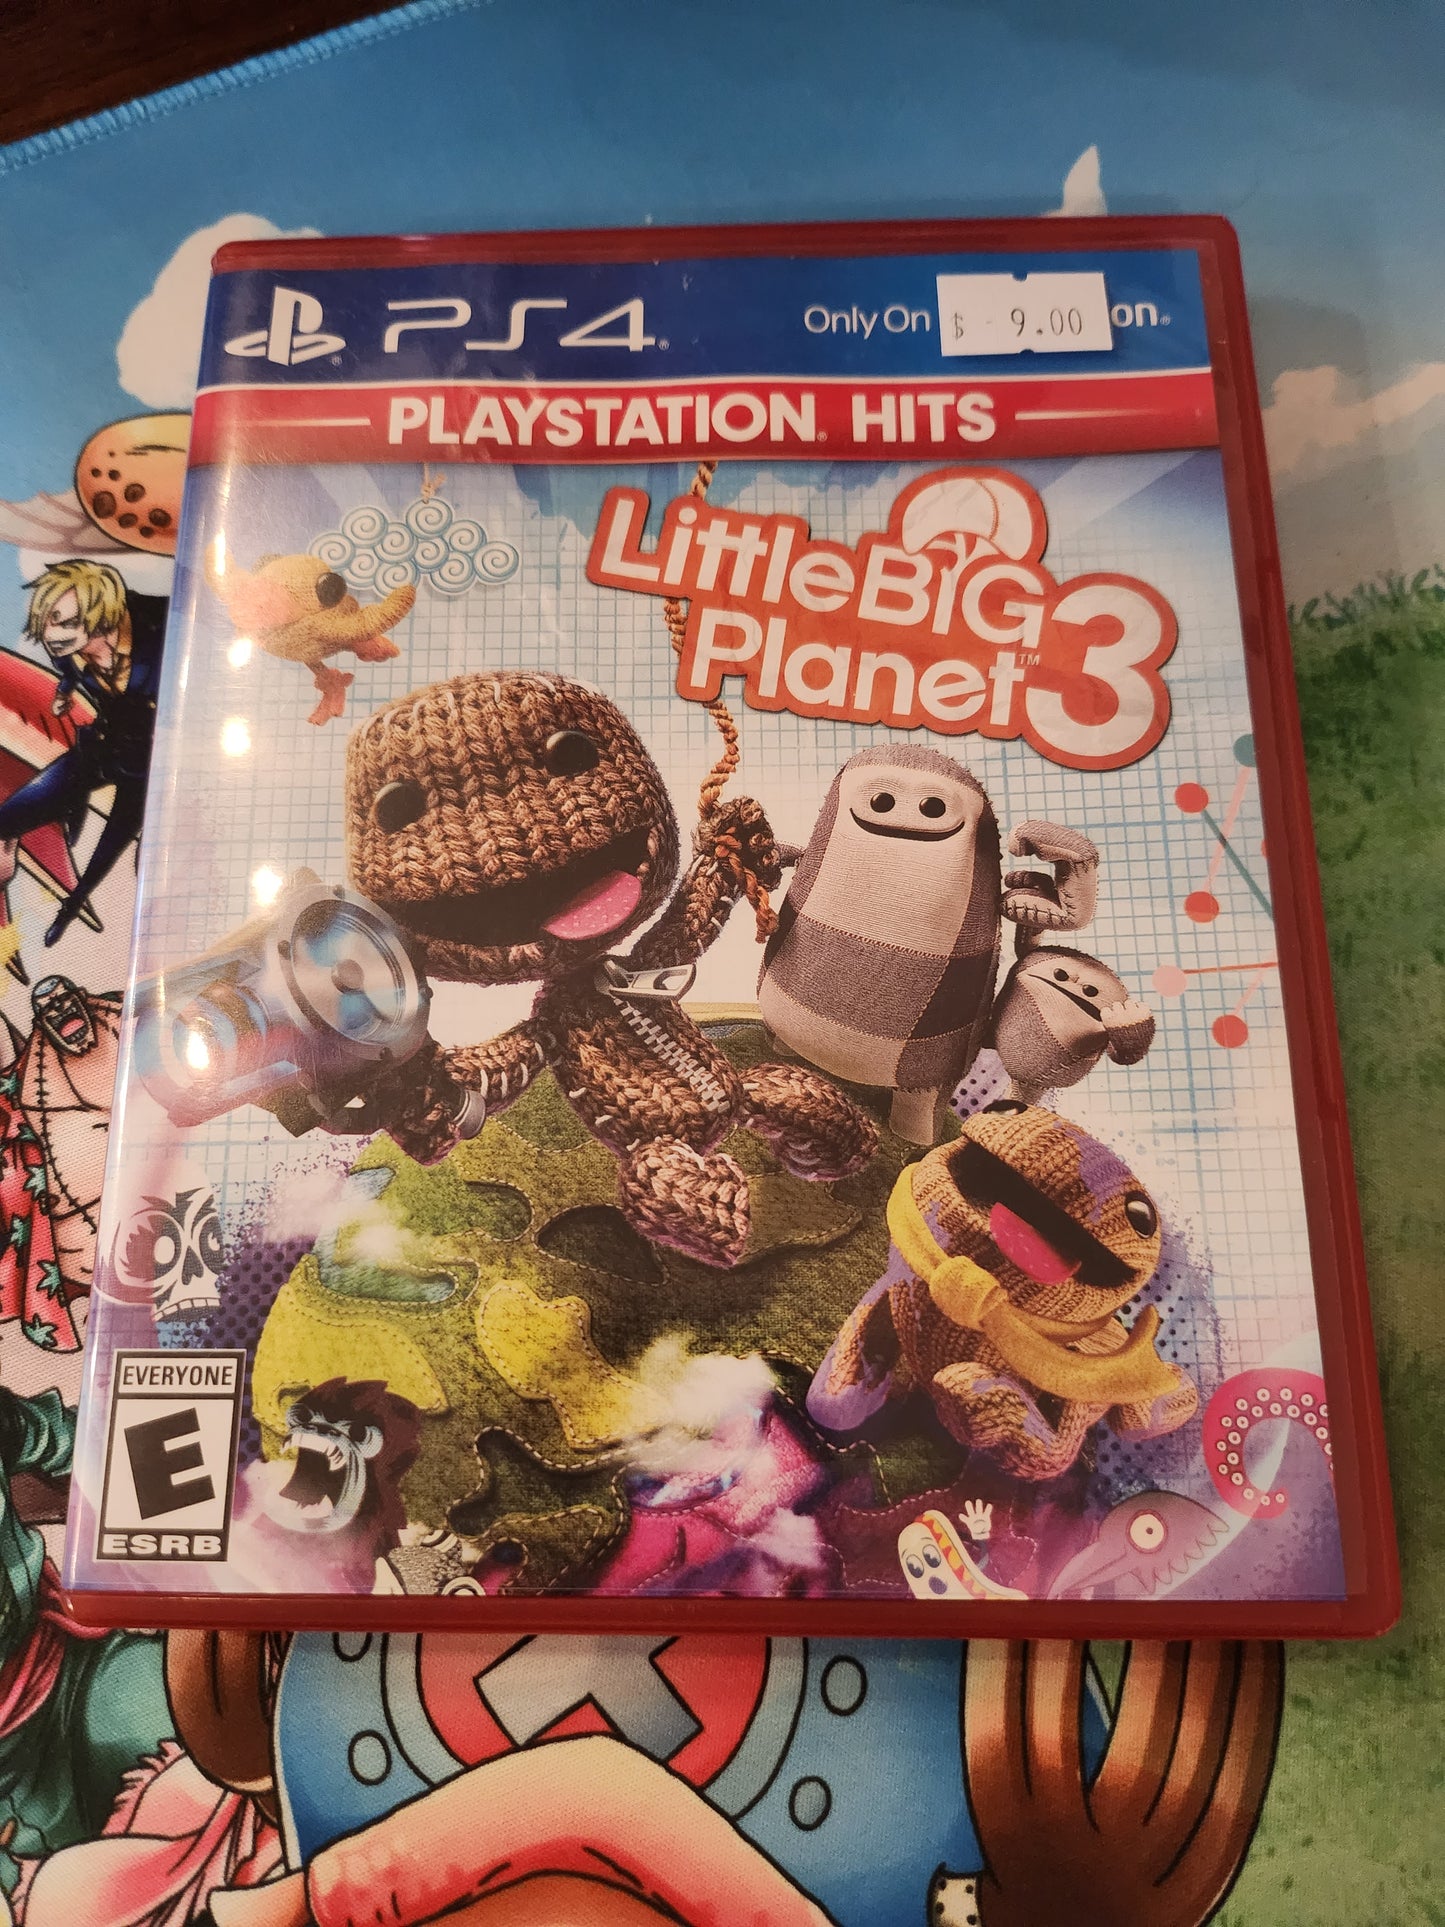 Little big planet 3 playstation hits ps4